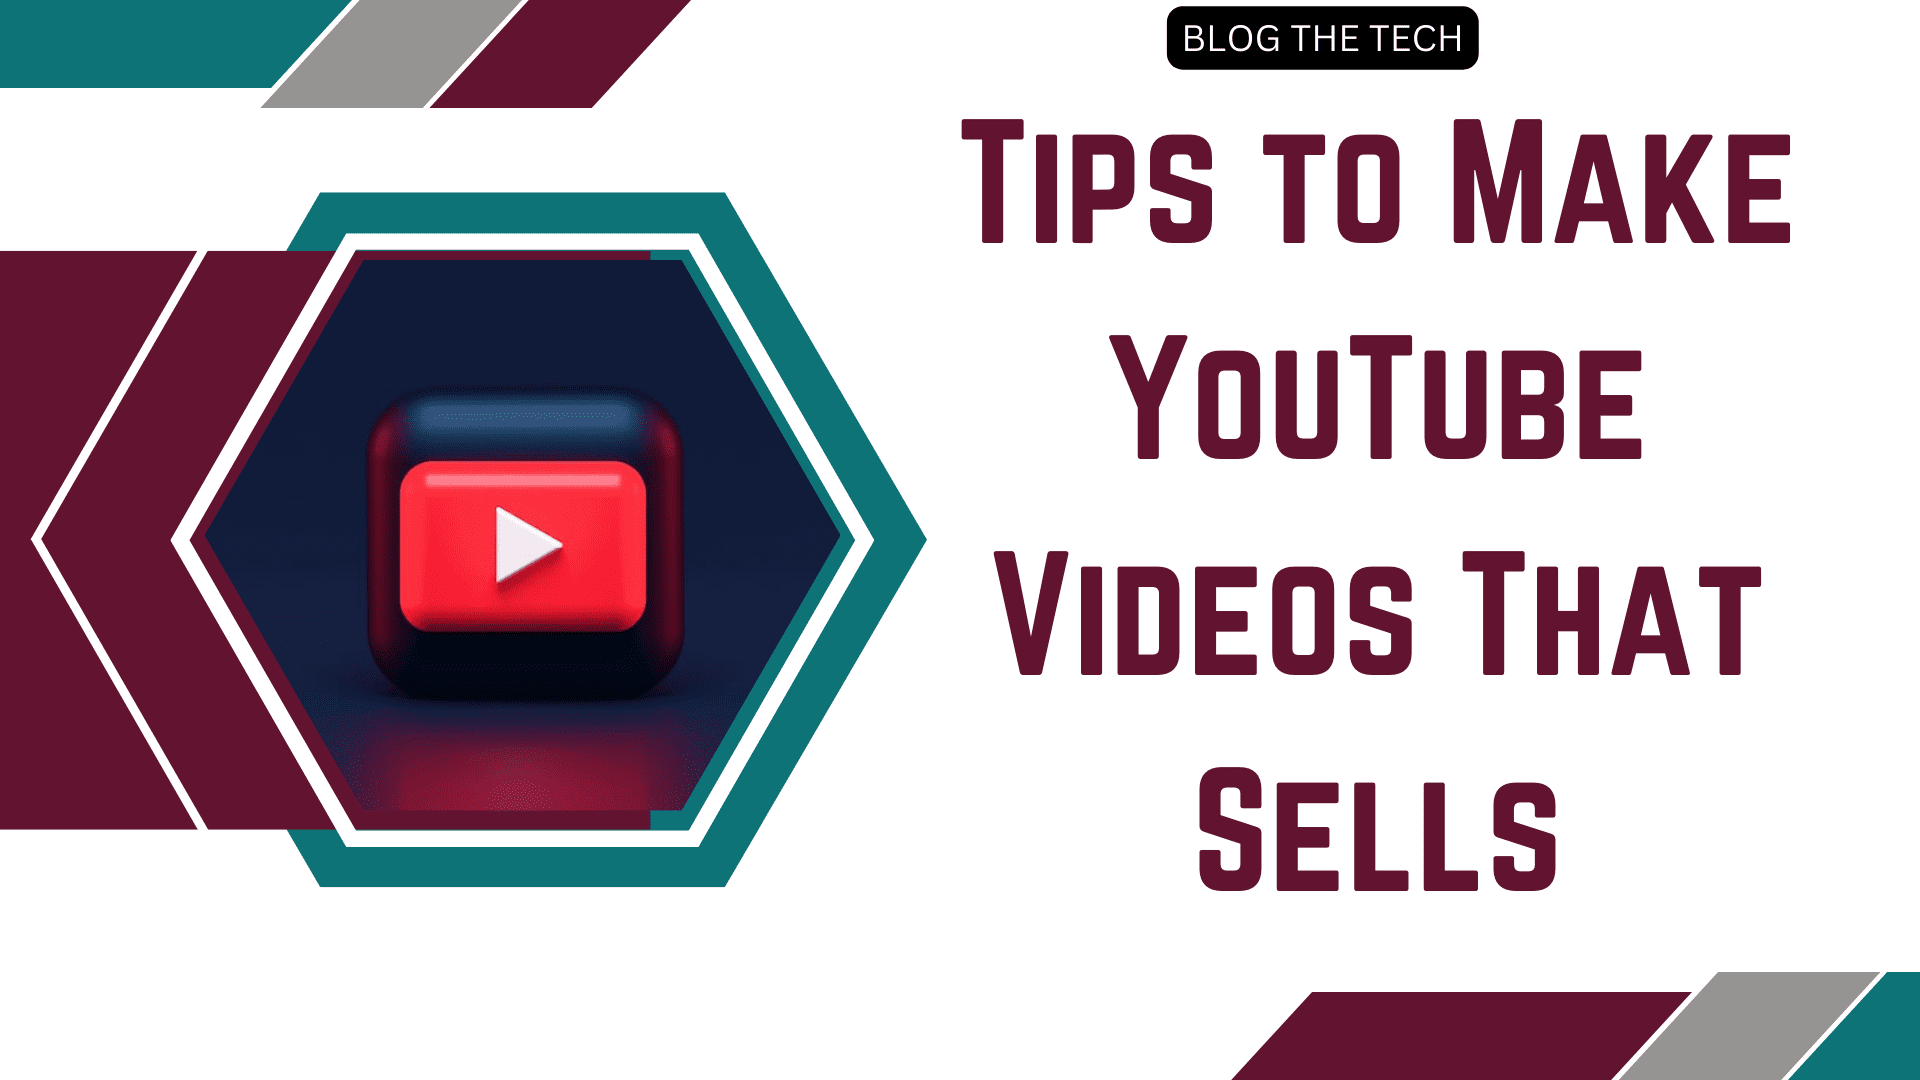 Tips to Make YouTube Videos That Sells